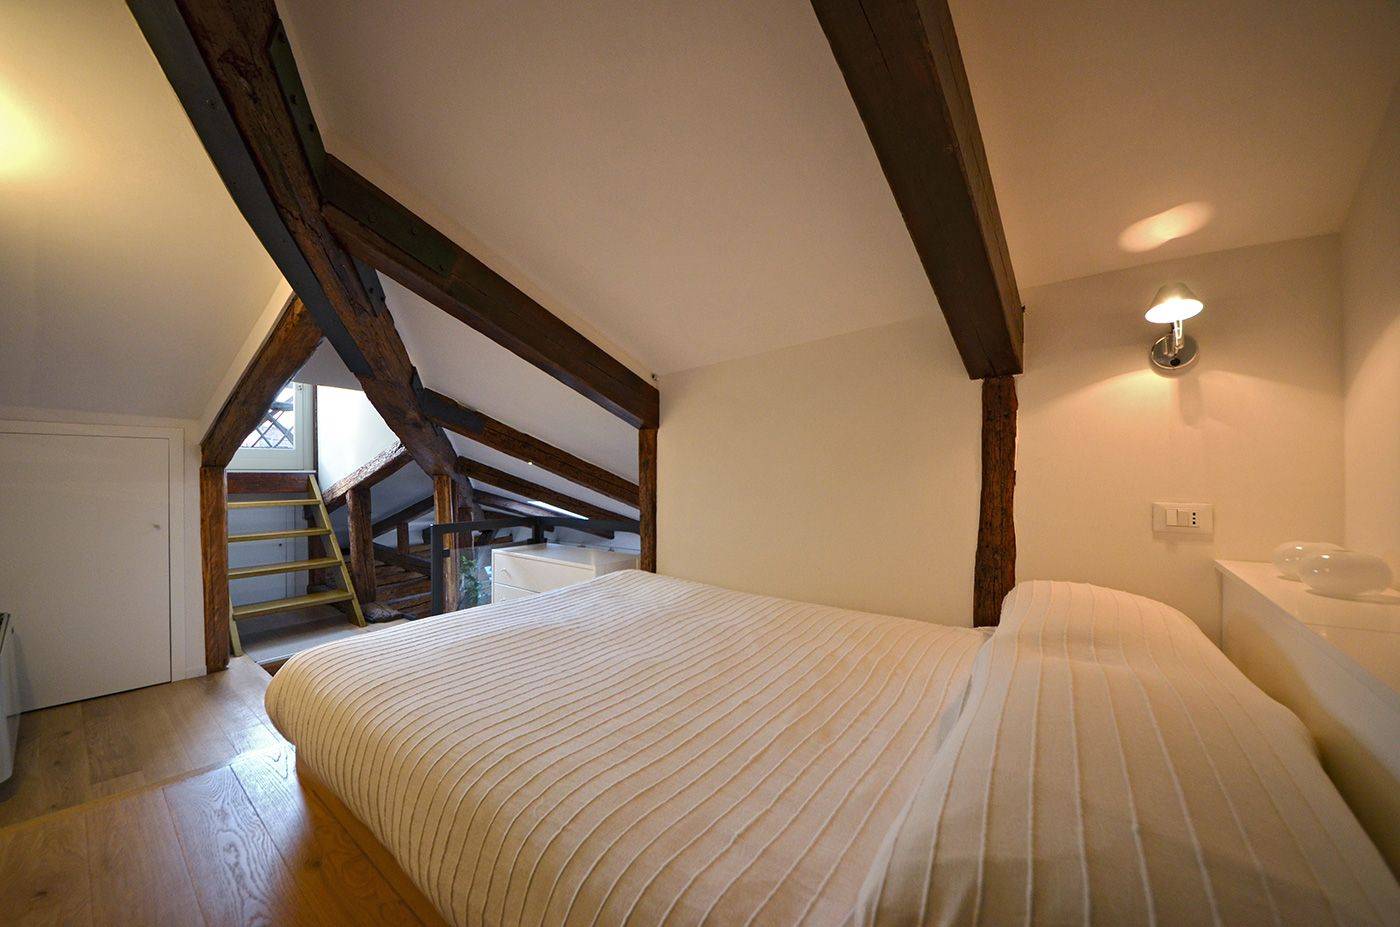 in the attic level there is a 140 cm wide bed